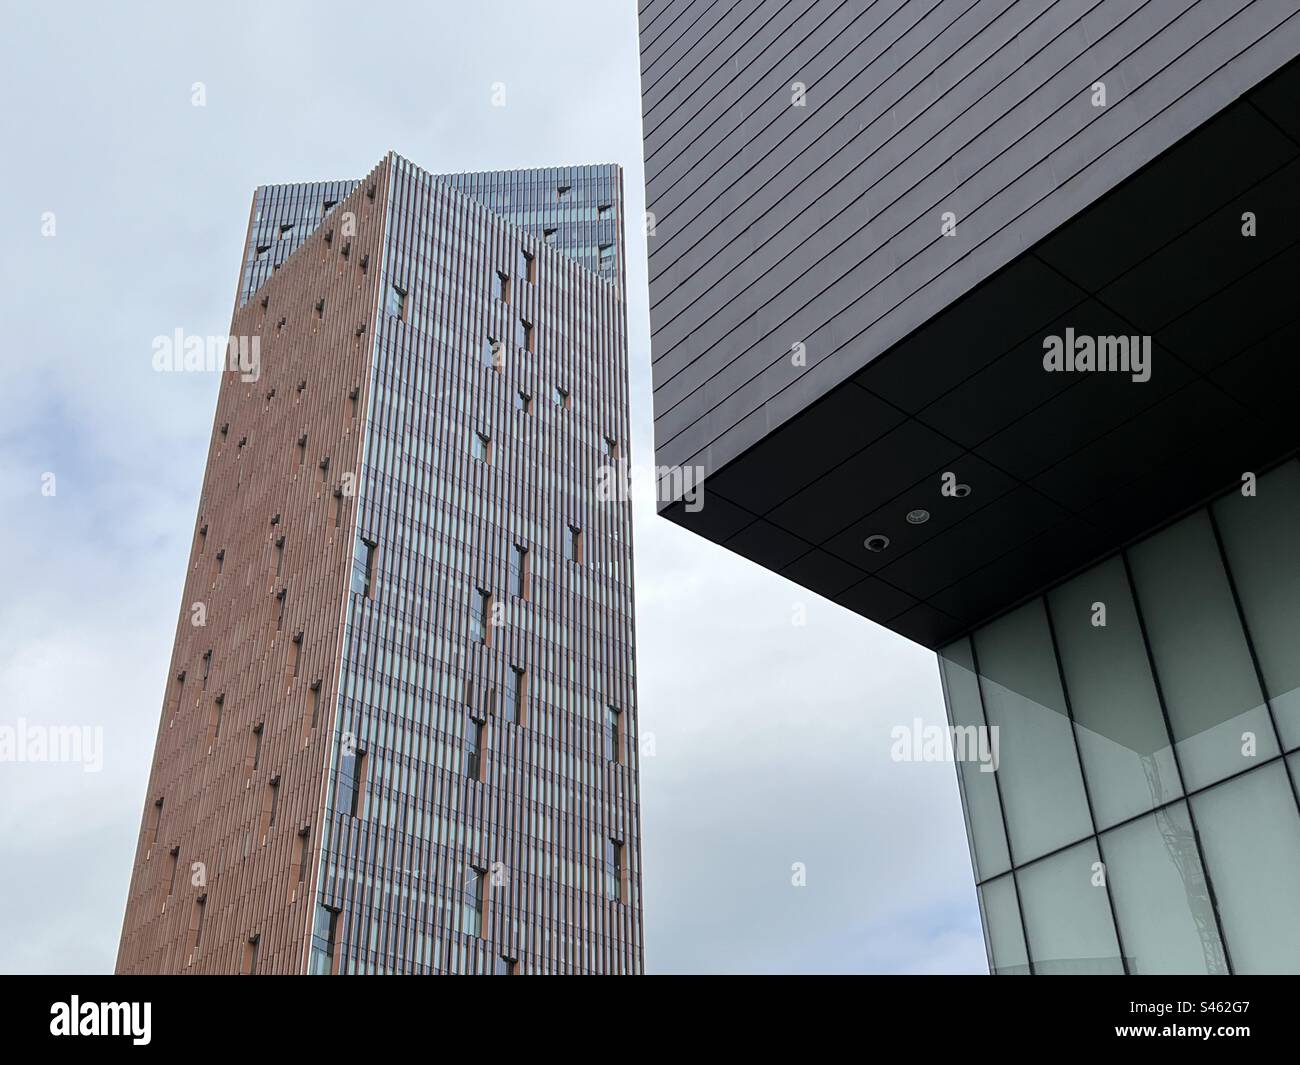 Shapes and sizes, Stratford, london. Stock Photo